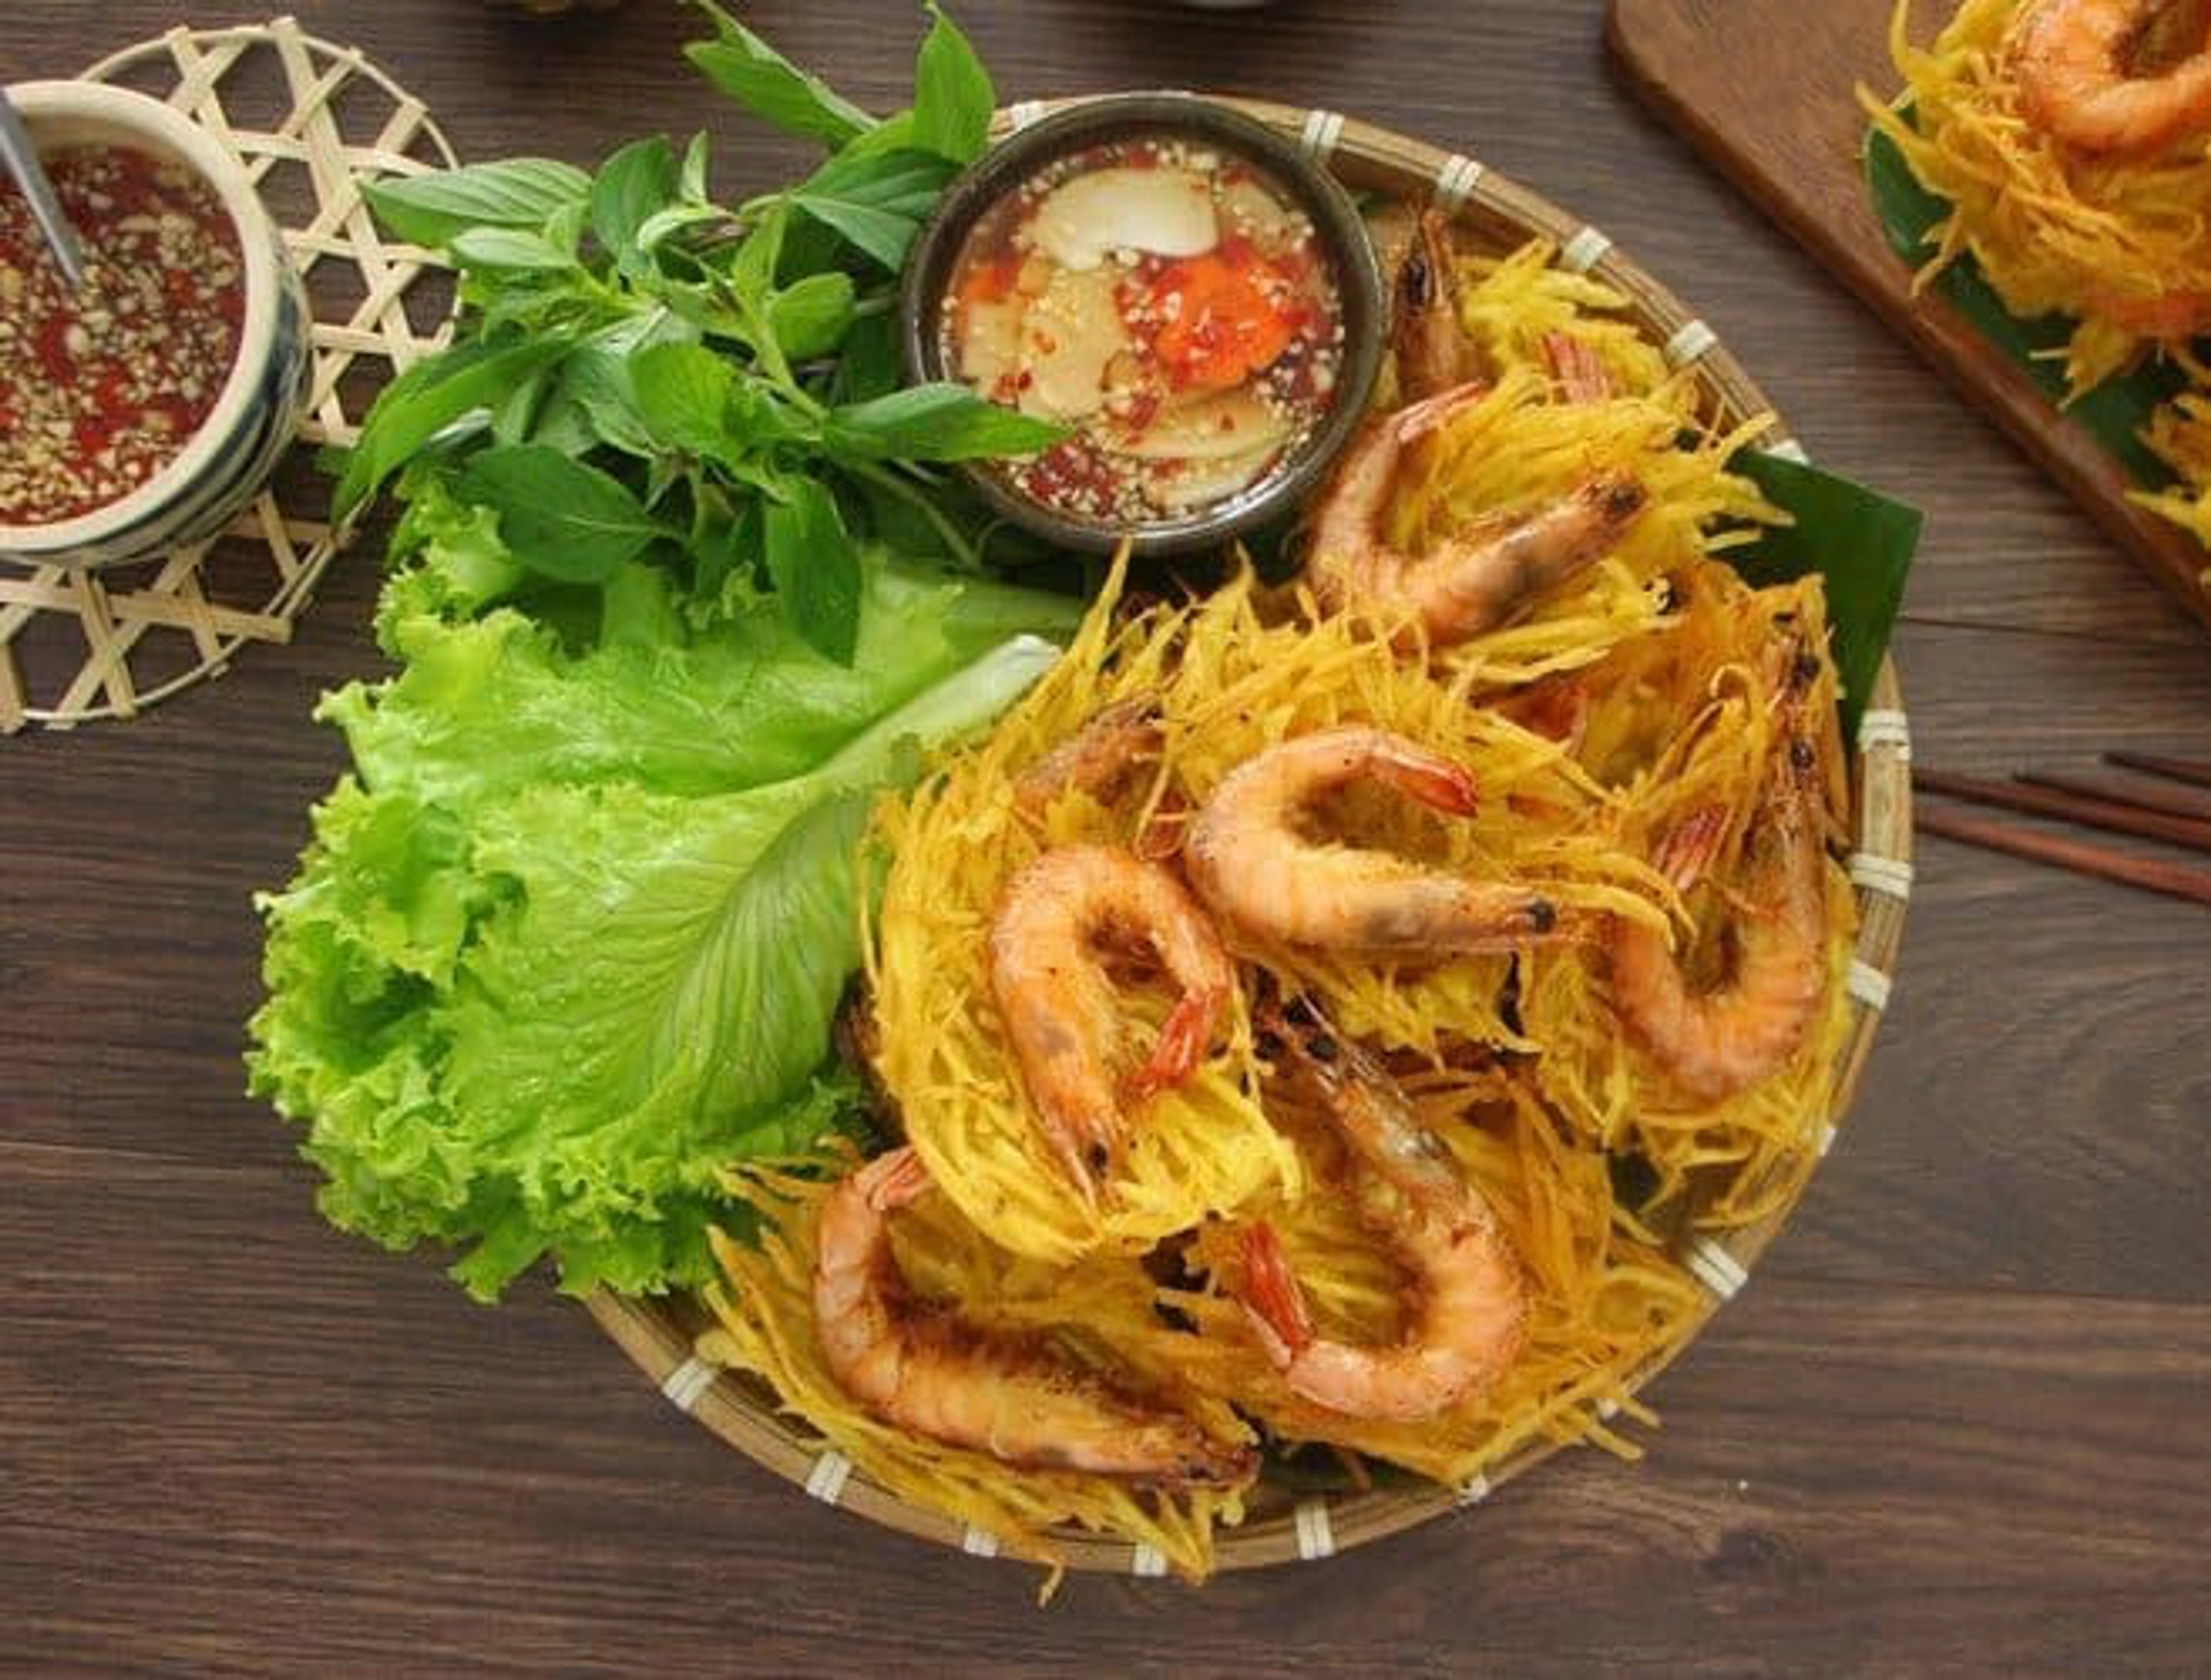  Top 6 Delicious Shrimp Cake Restaurants In Hanoi That You Can't Miss